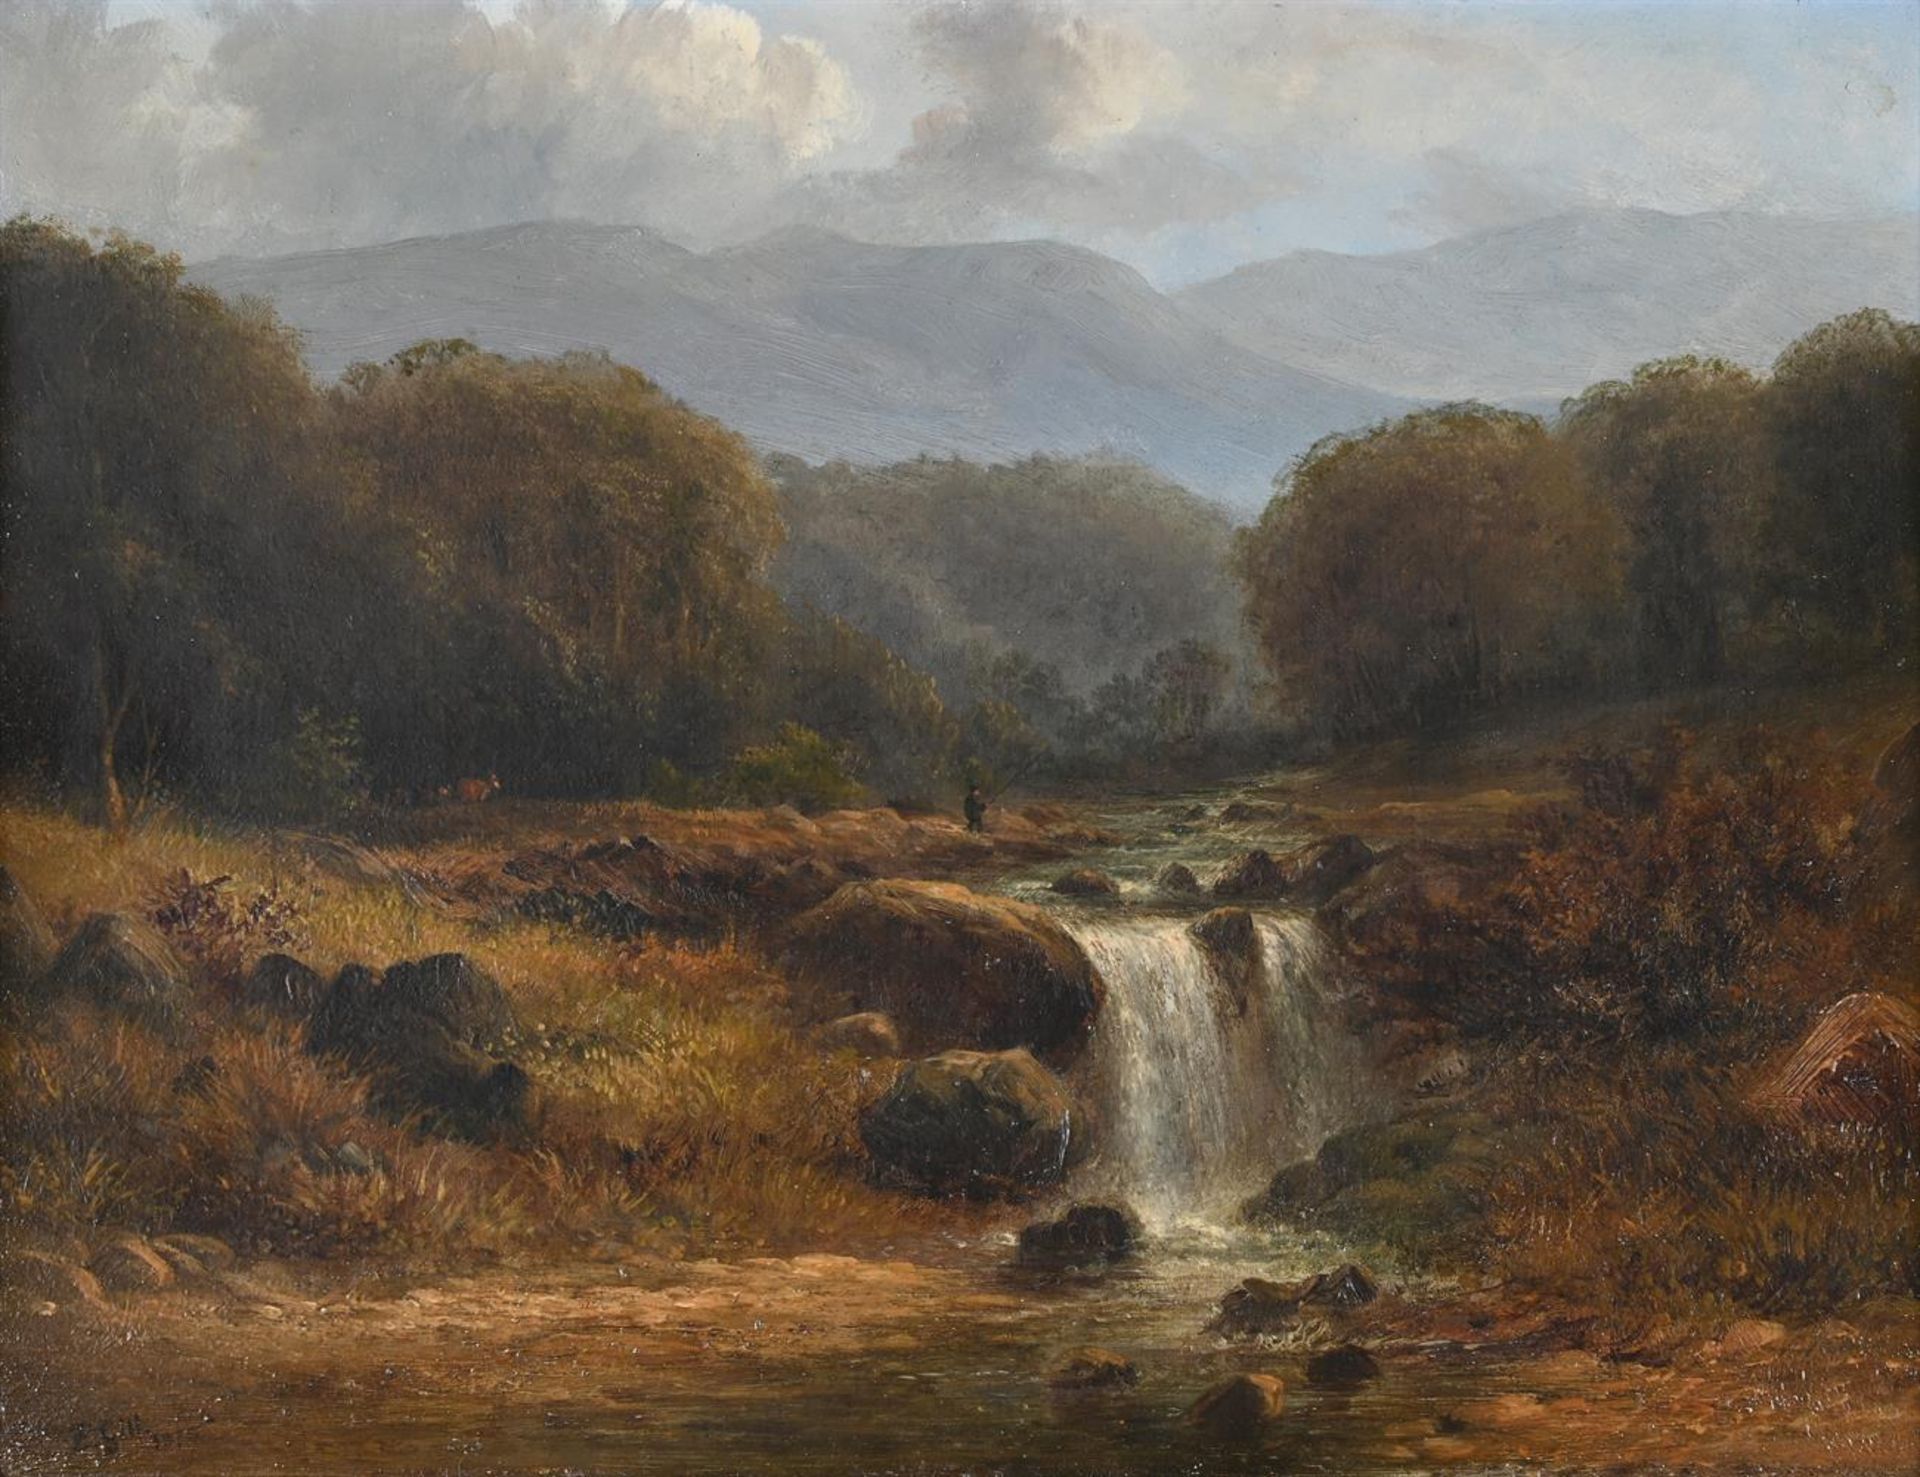 EDMUND GILL (BRITISH 1820-1894), WATERFALL ON THE UPPER REACHES OF THE CLYDE - Image 2 of 3